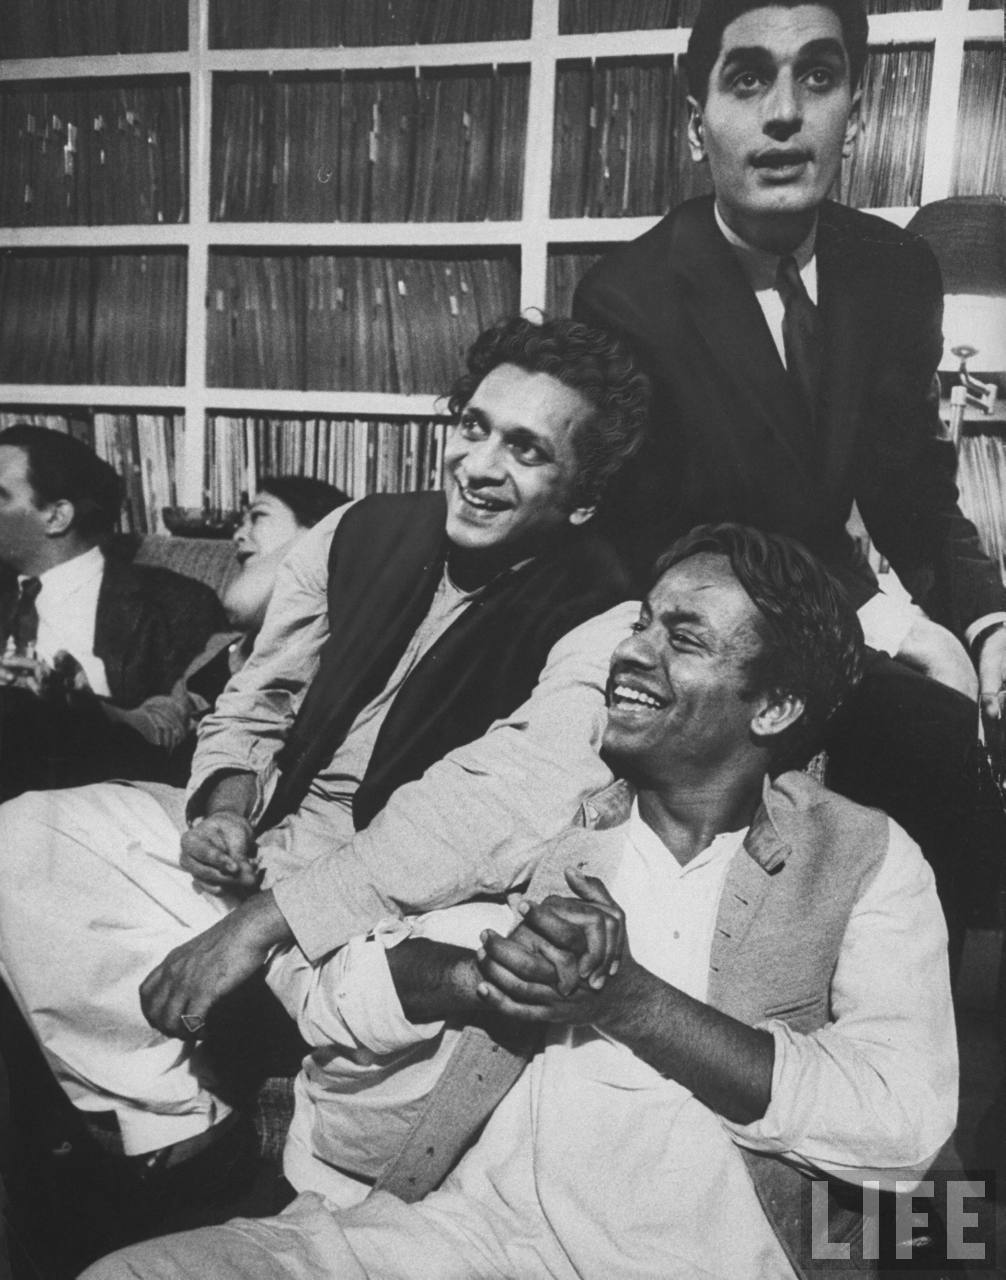 Pandit Chatur Lal with Pandi Ravi Shankar in a light mood Source: Life Archive hosted by Google